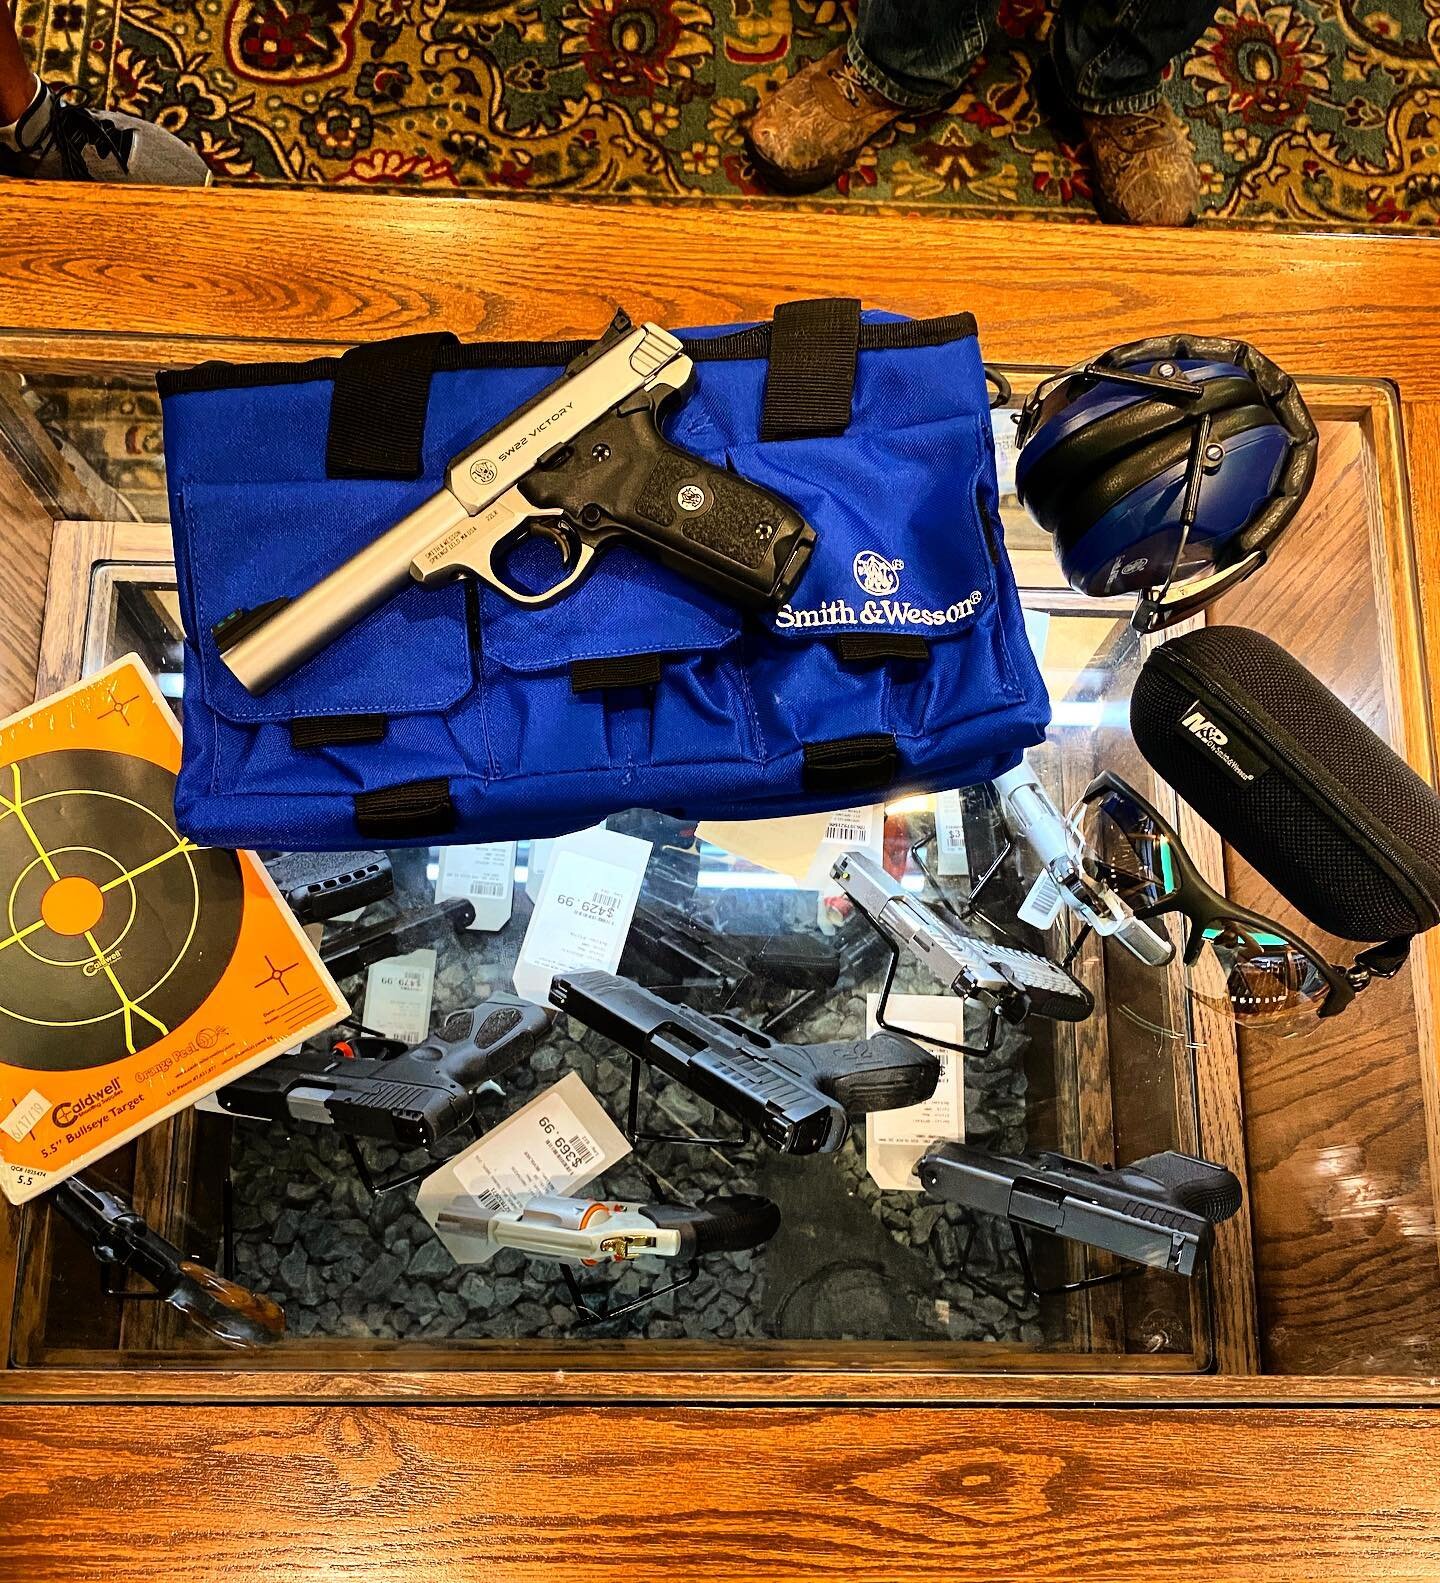 Come to Mallards and scoop up this awesome range kit for a low price of 450 dollars! 

#gunsofinstagram#mallards#guns#gunrange#guns#gunsdaily#gunz